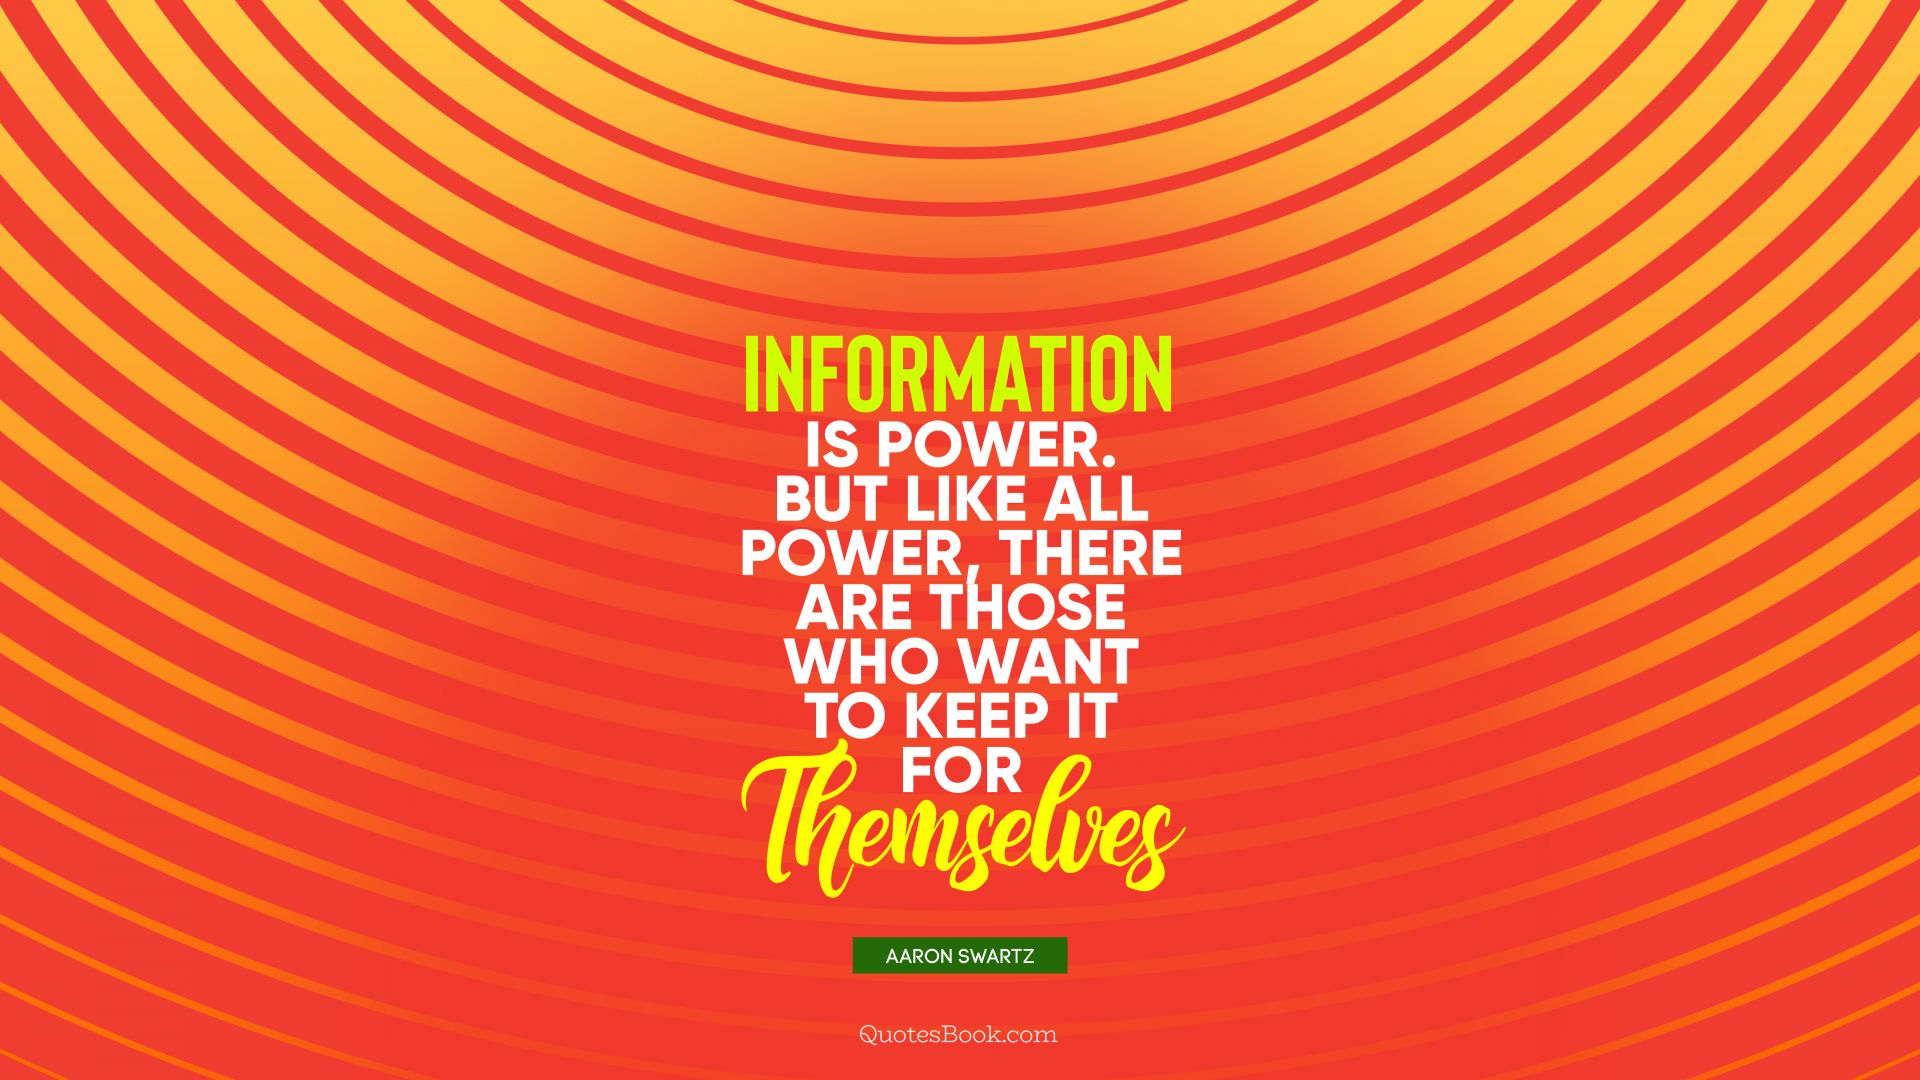 Information is power. But like all power, there are those who want to keep it for themselves. - Quote by Aaron Swartz